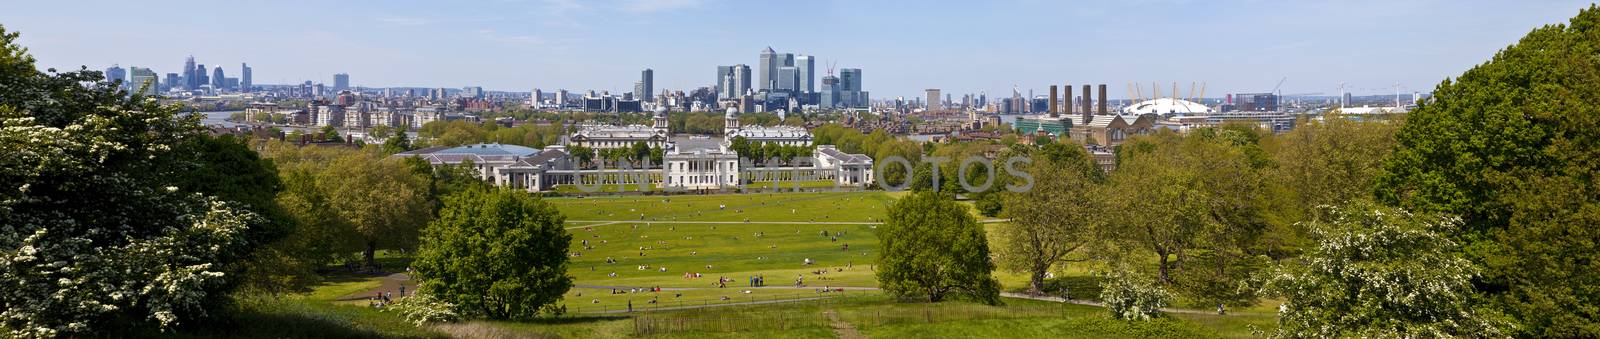 London Panoramic from Greenwich Park by chrisdorney